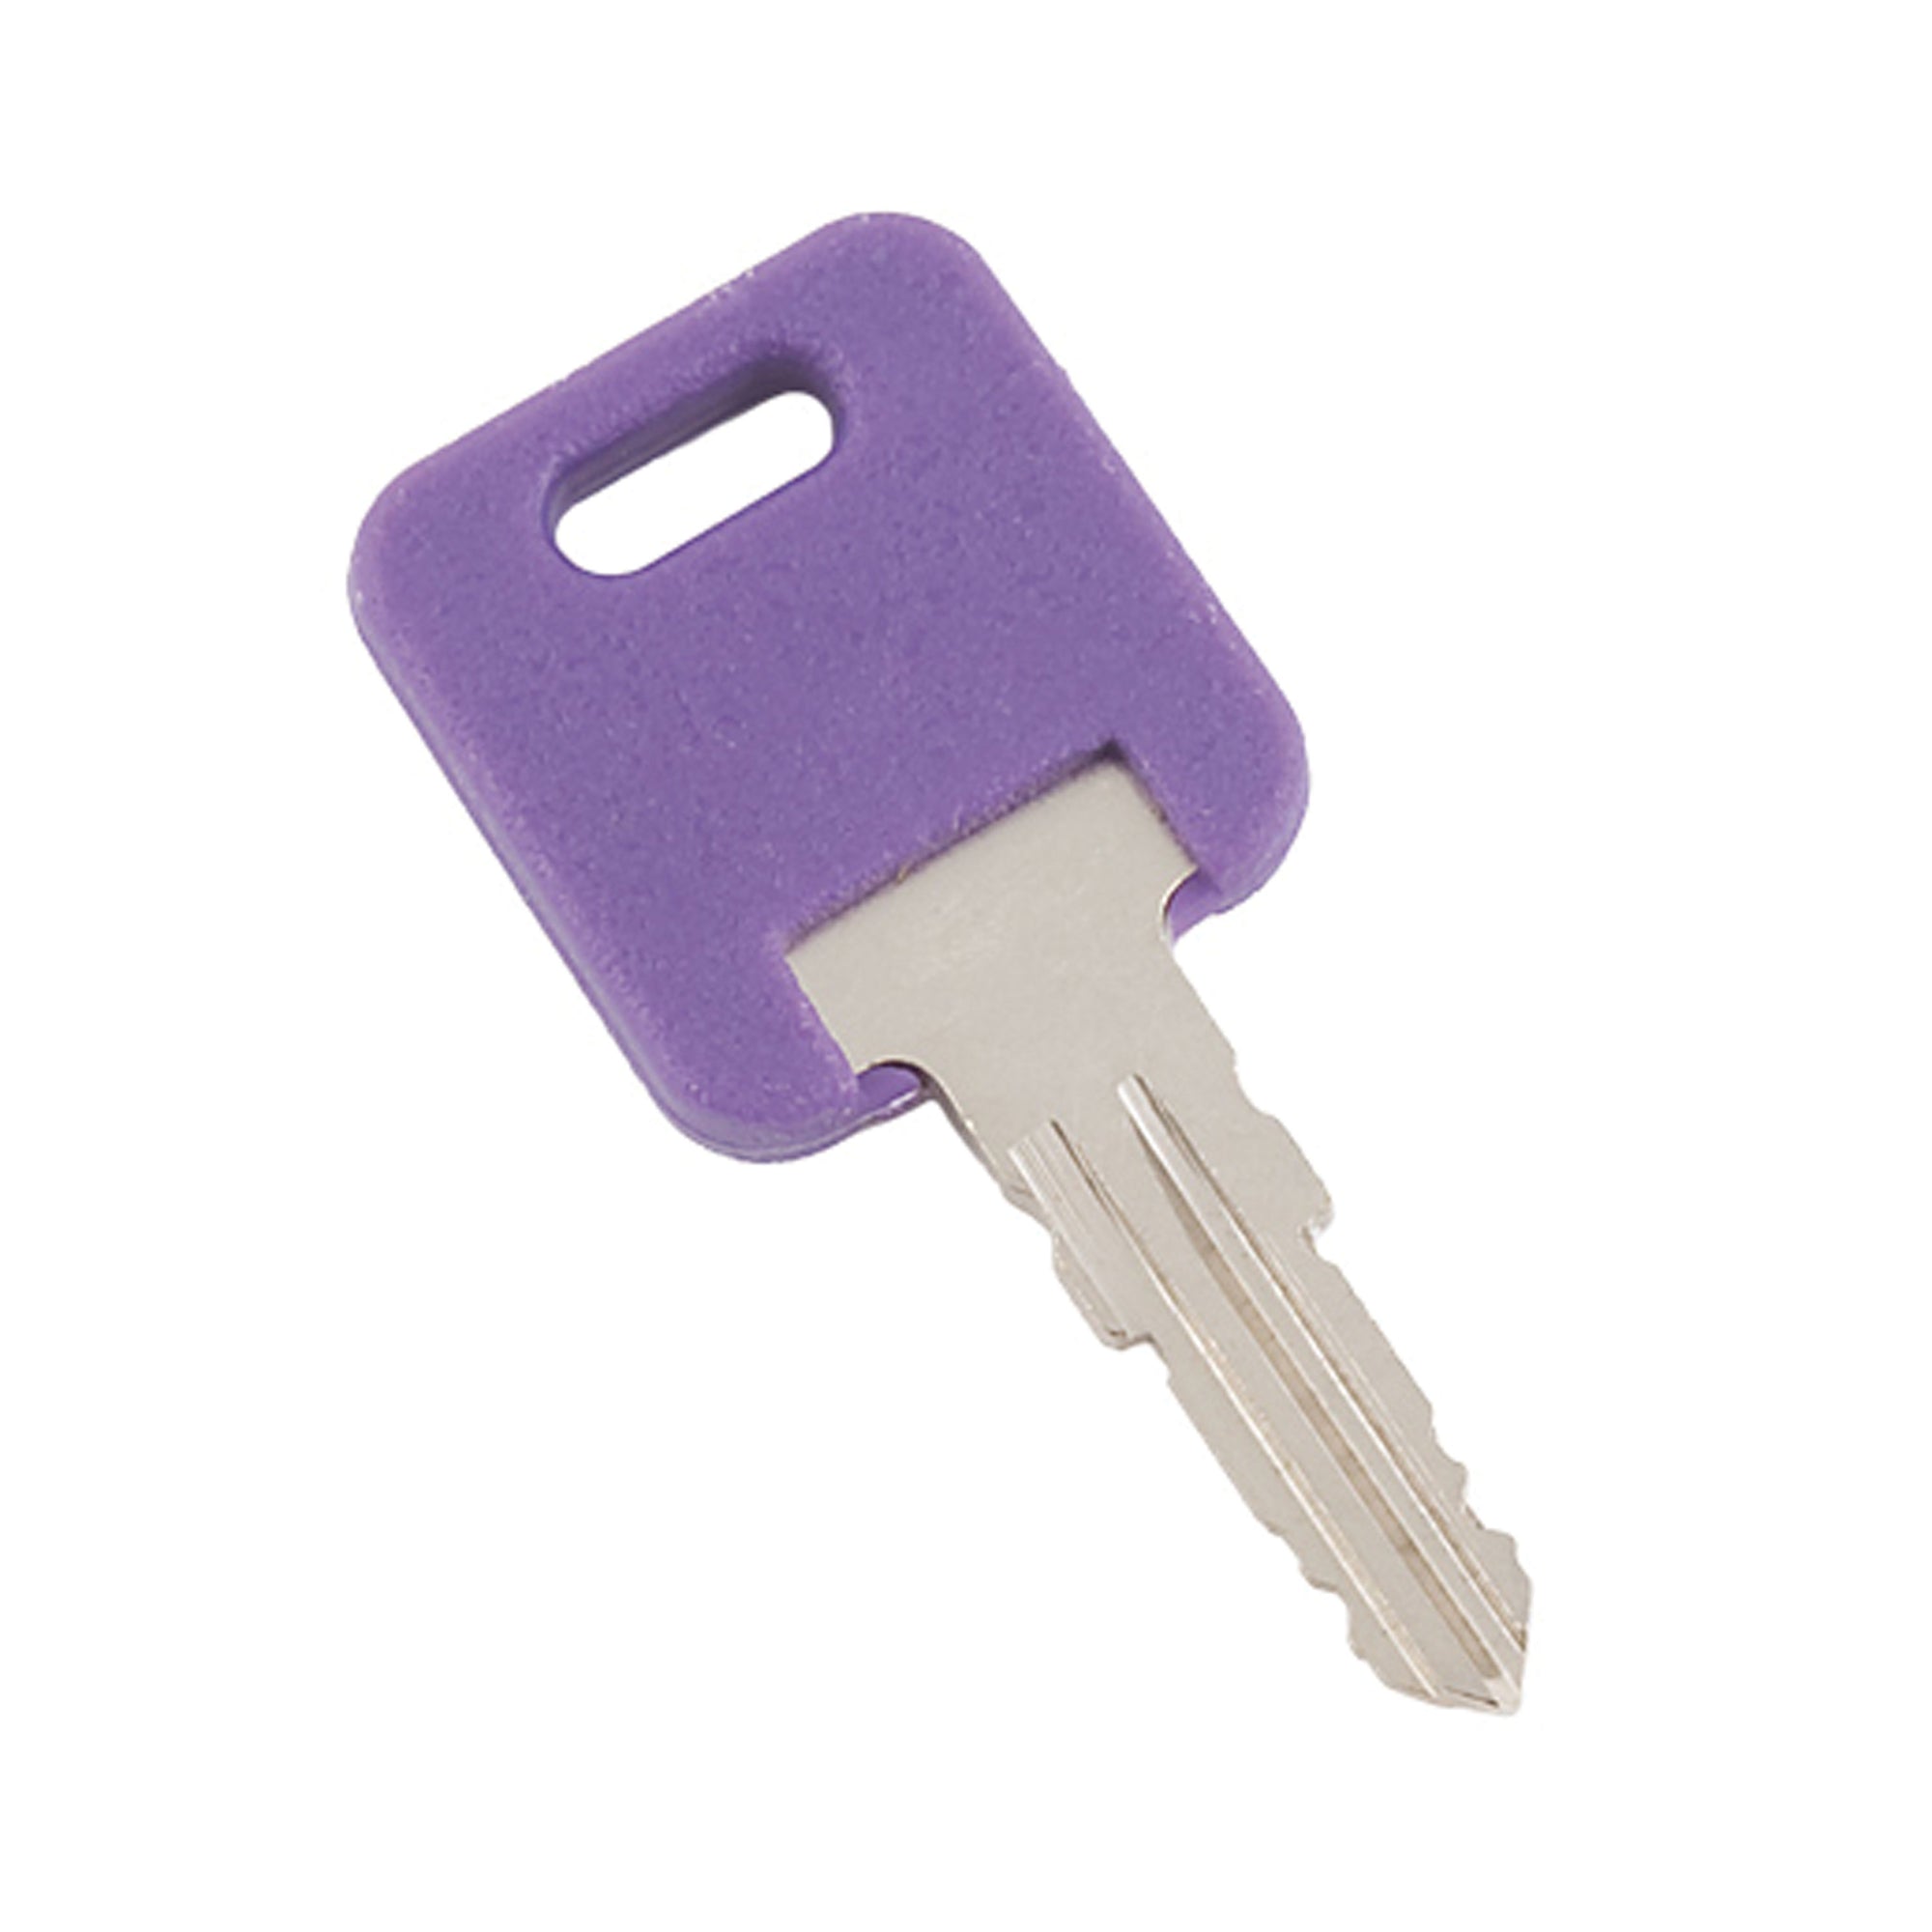 Creative Products Group G-370 Global Link G-Series Replacement Key - #370, Each